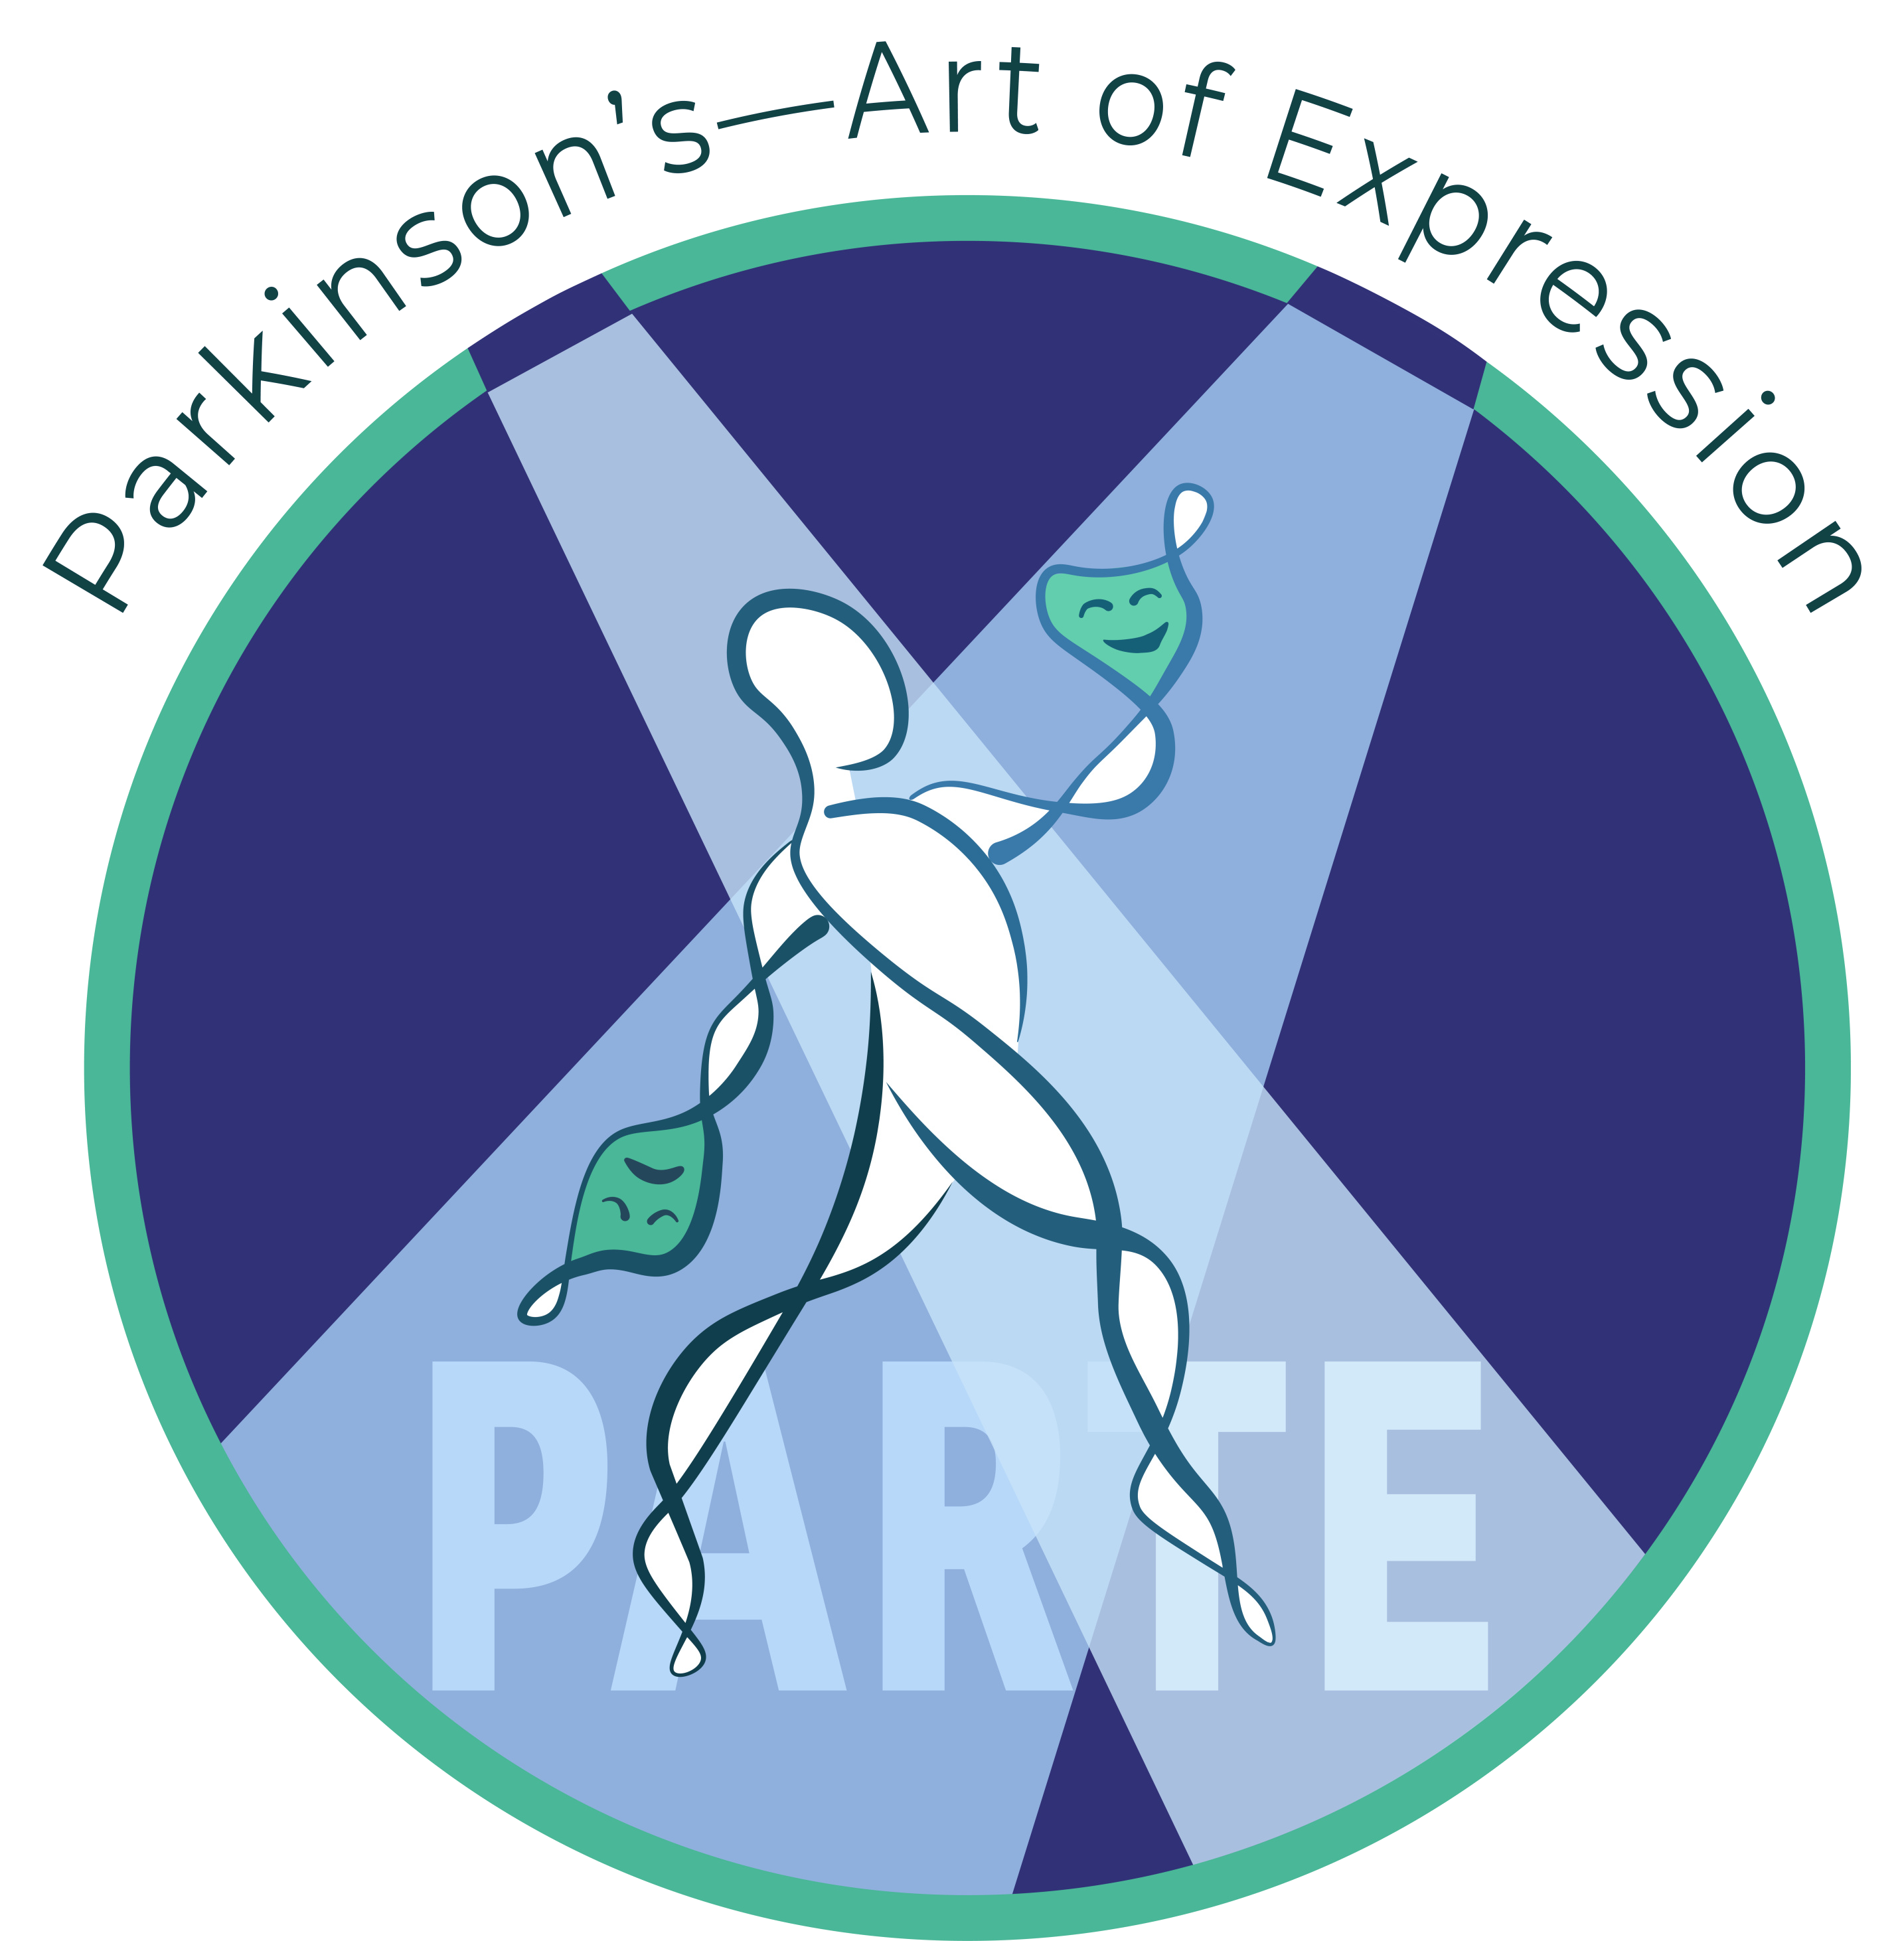 Parkinson's-Art of Expression